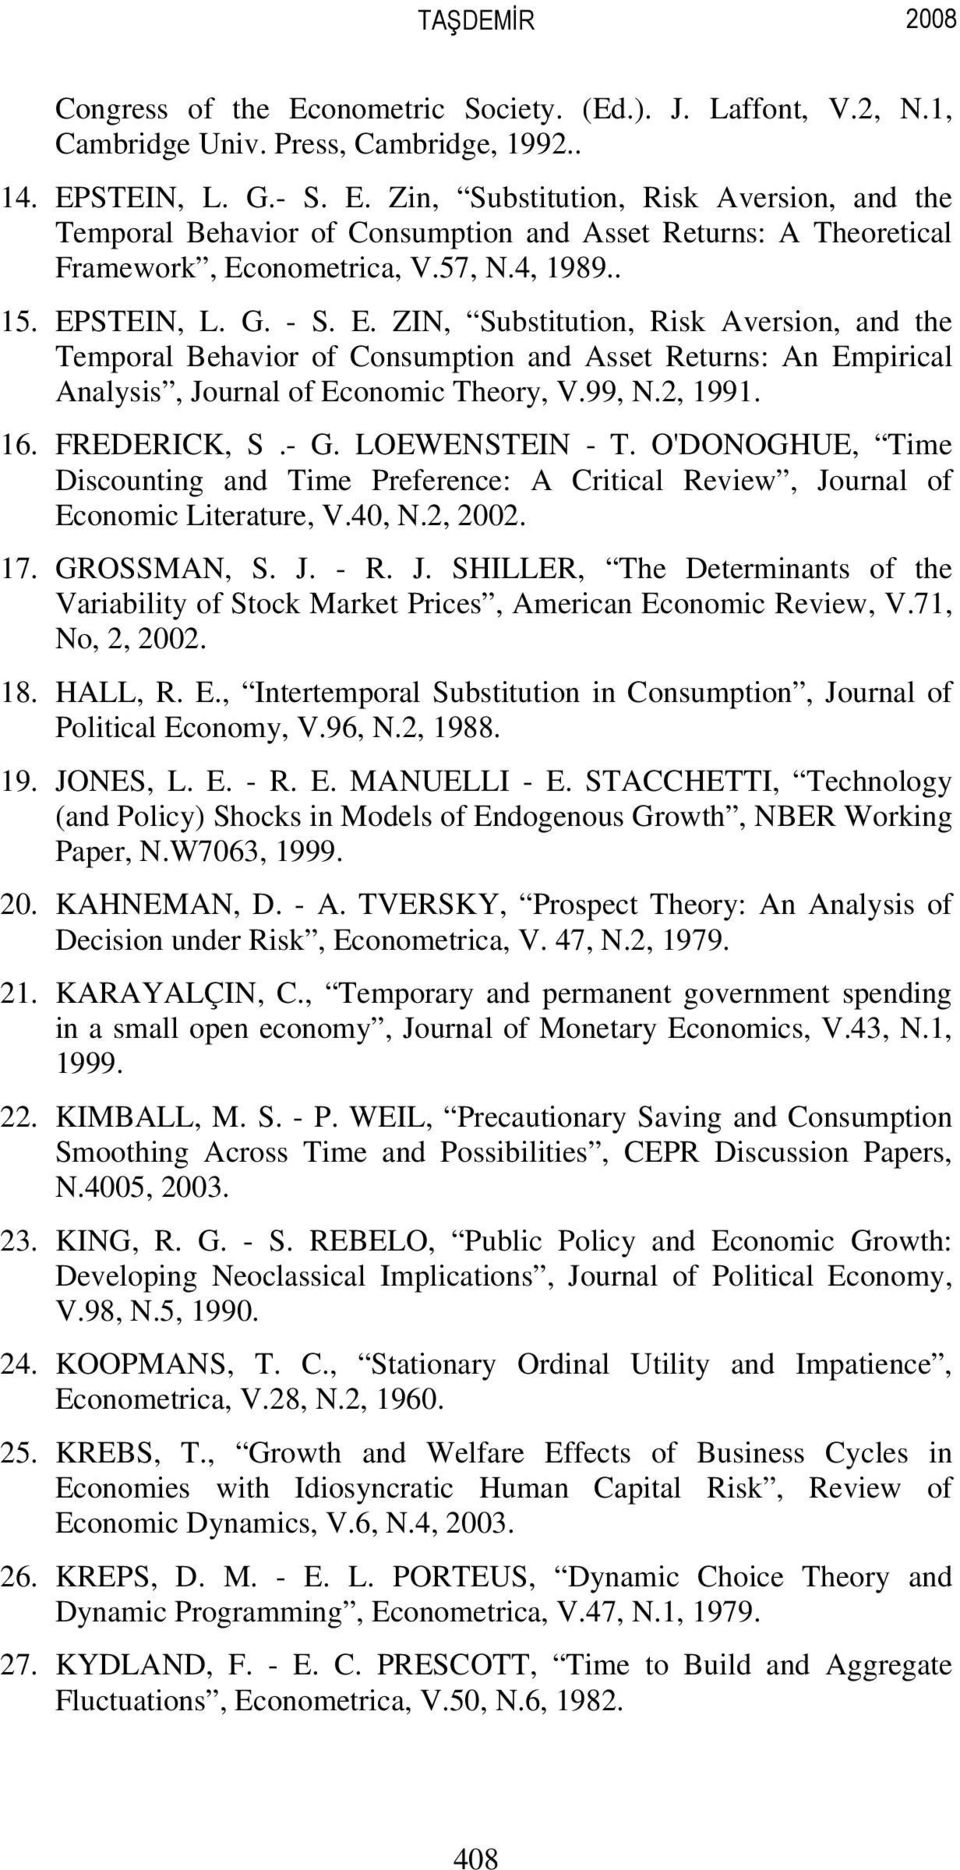 FREDERICK, S.- G. LOEWENSTEIN - T. O'DONOGHUE, Time Discouning and Time Preference: A Criical Review, Journal of Economic Lieraure, V.40, N.2, 2002. 7. GROSSMAN, S. J. - R. J. SHILLER, The Deerminans of he Variabiliy of Sock Marke Prices, American Economic Review, V.